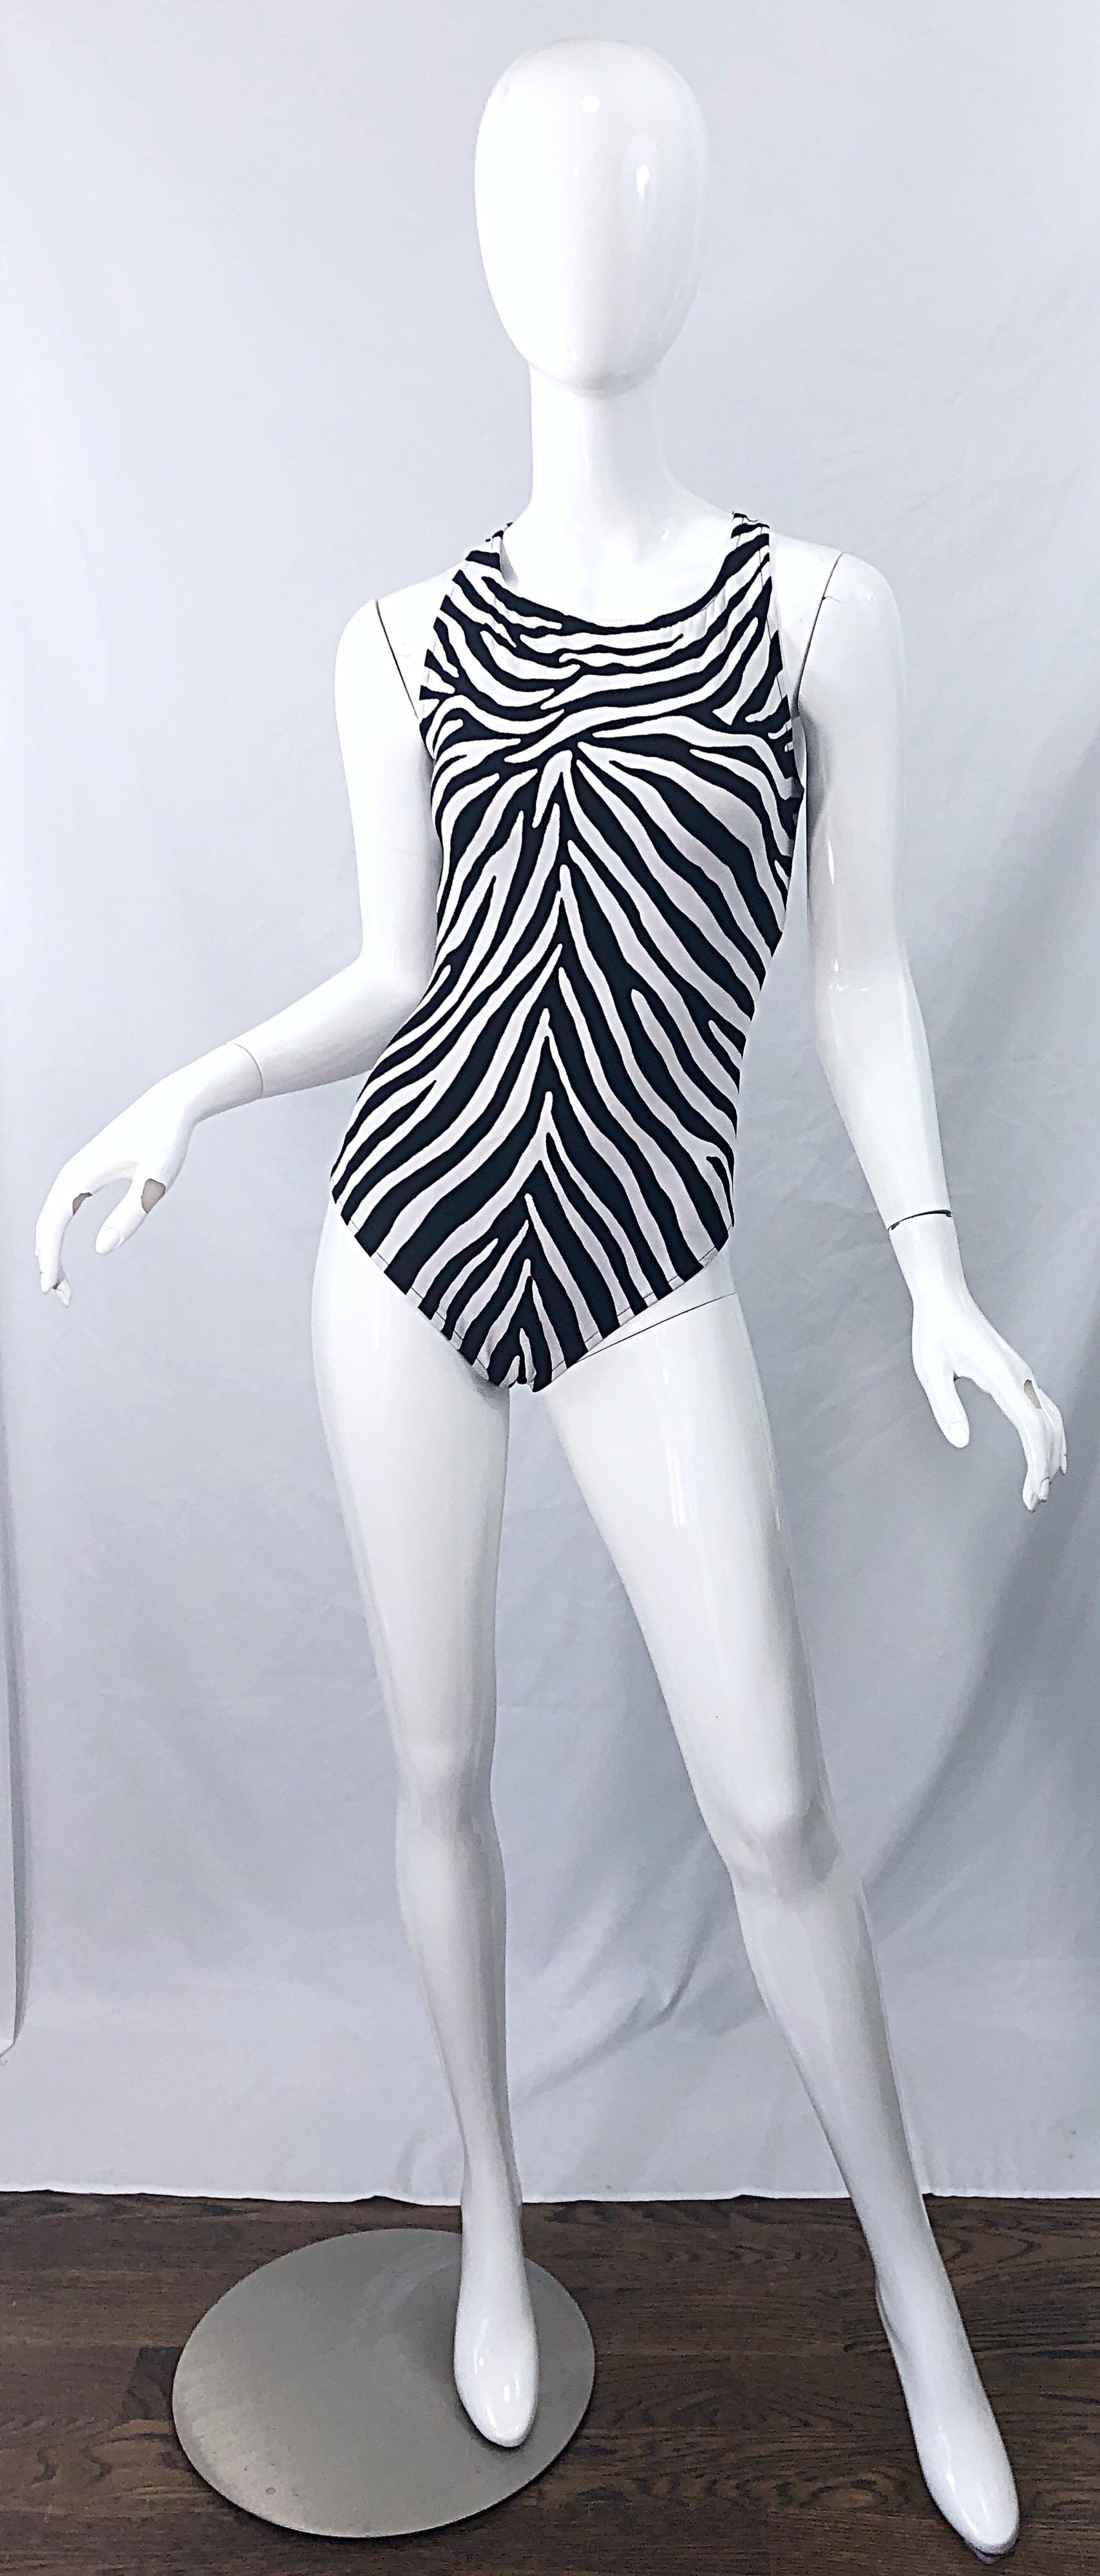 Roar in this 80s vintage BILL BLASS zebras animal print black and white one piece swimsuit / bodysuit ! Features a high neck for extra support wih an open back. Great for the beach, pool, or boat. Also great as a bodysuit with jeans, shorts or a